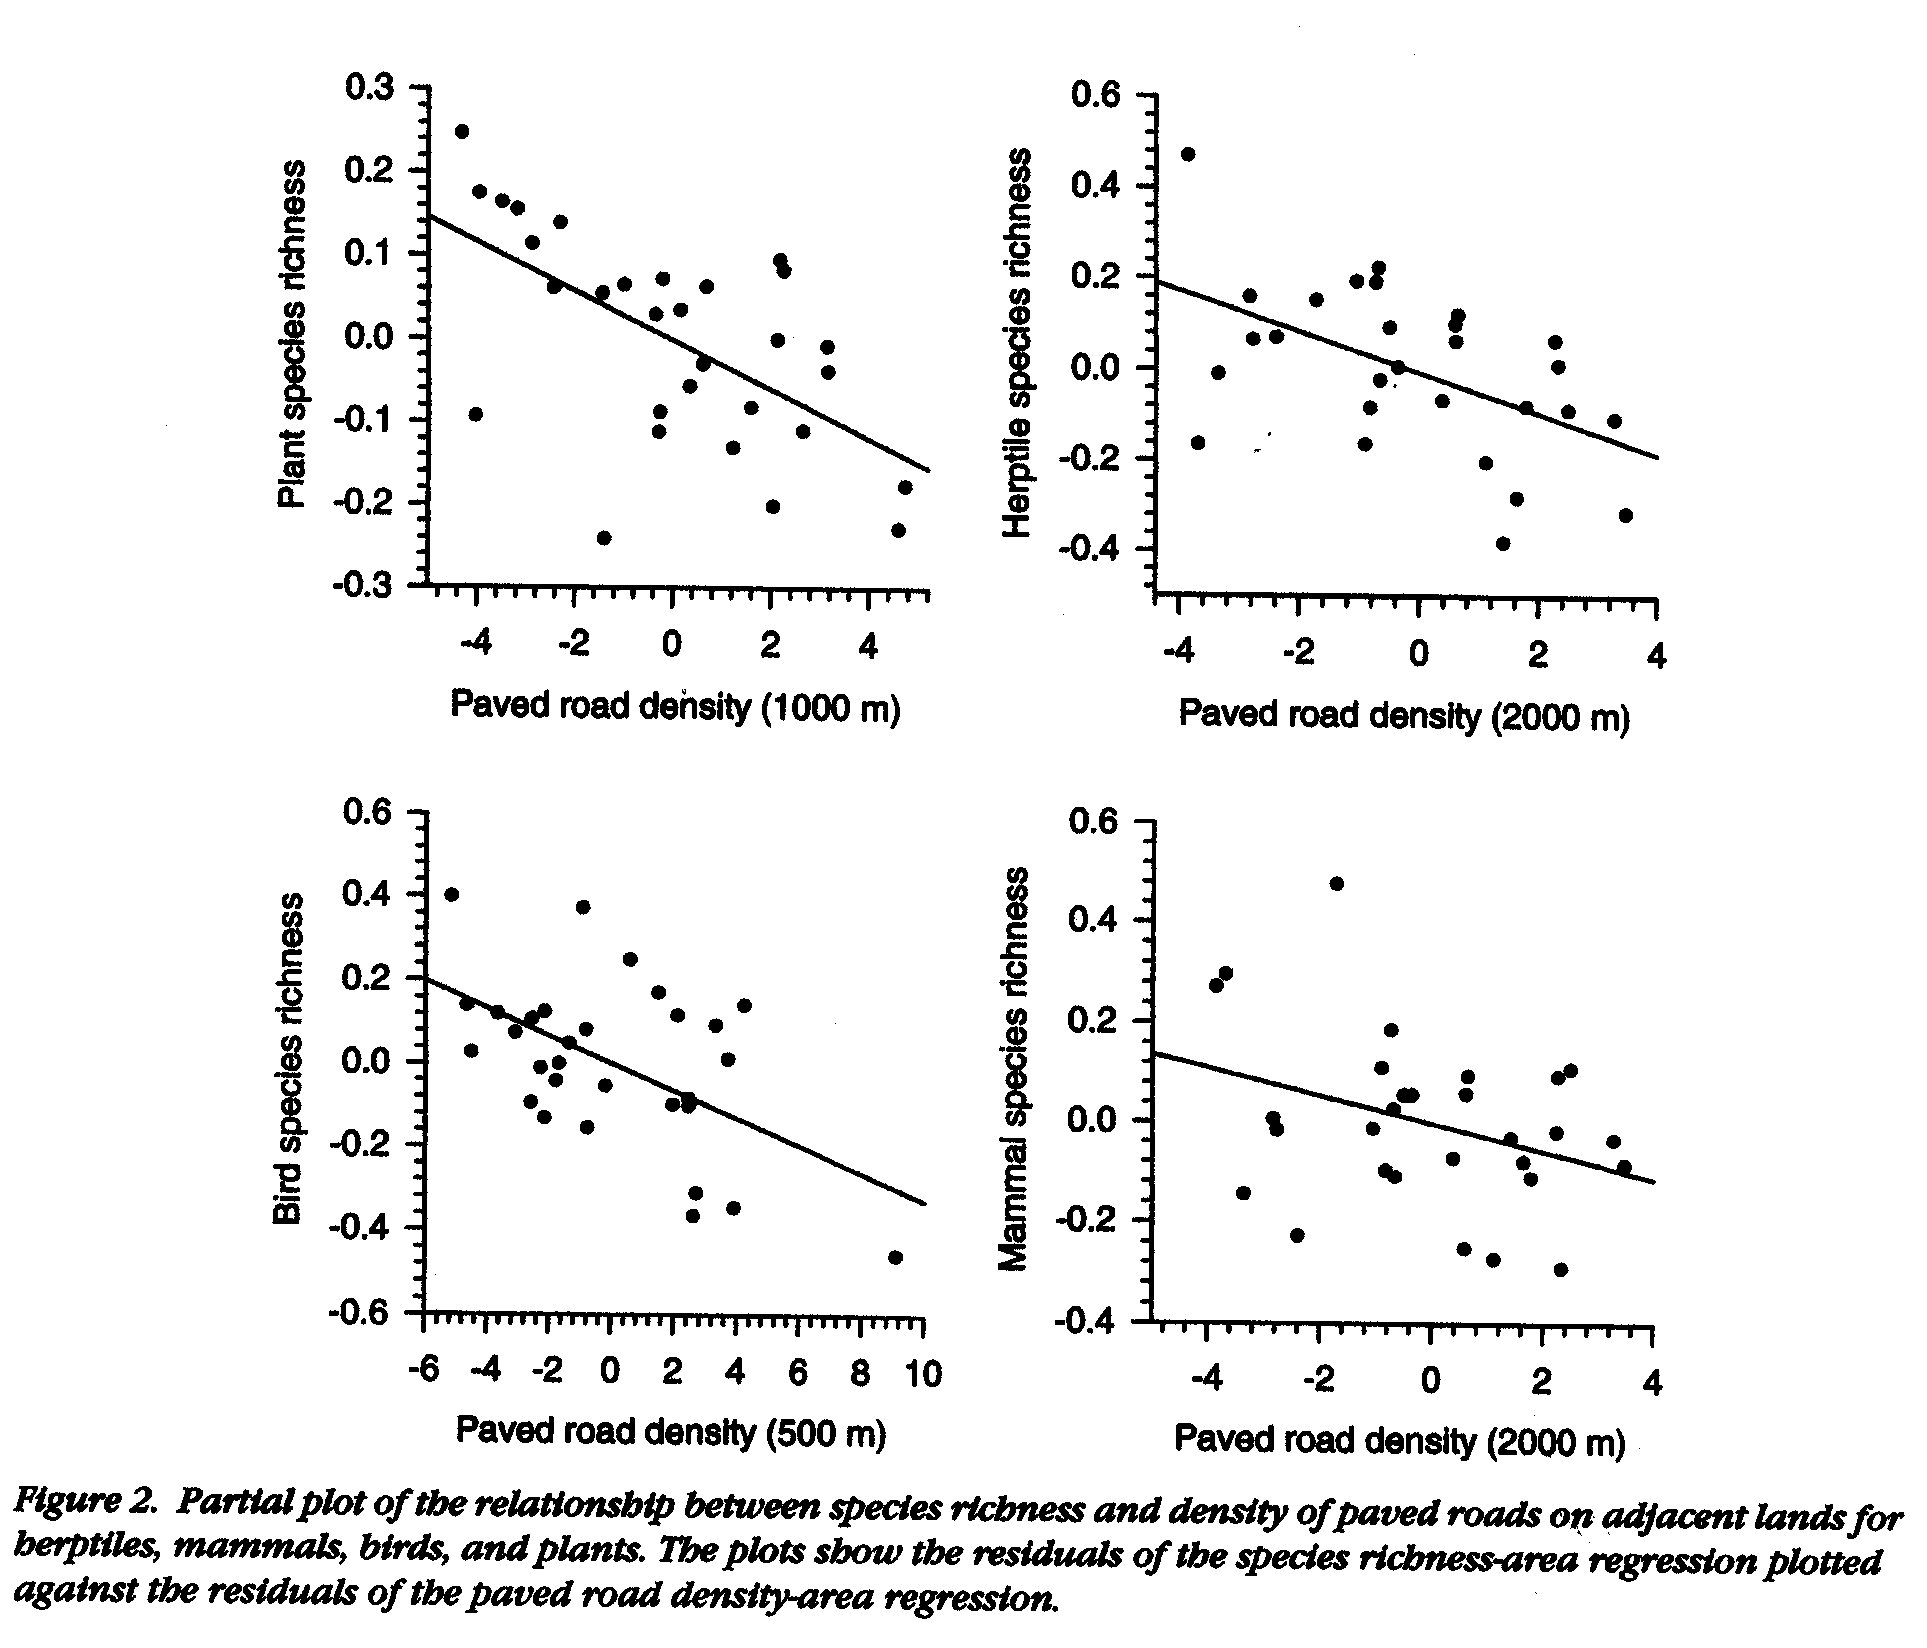 The Effect of Paved Road Density on Biodiversity, Findlay and Houlahan 1997